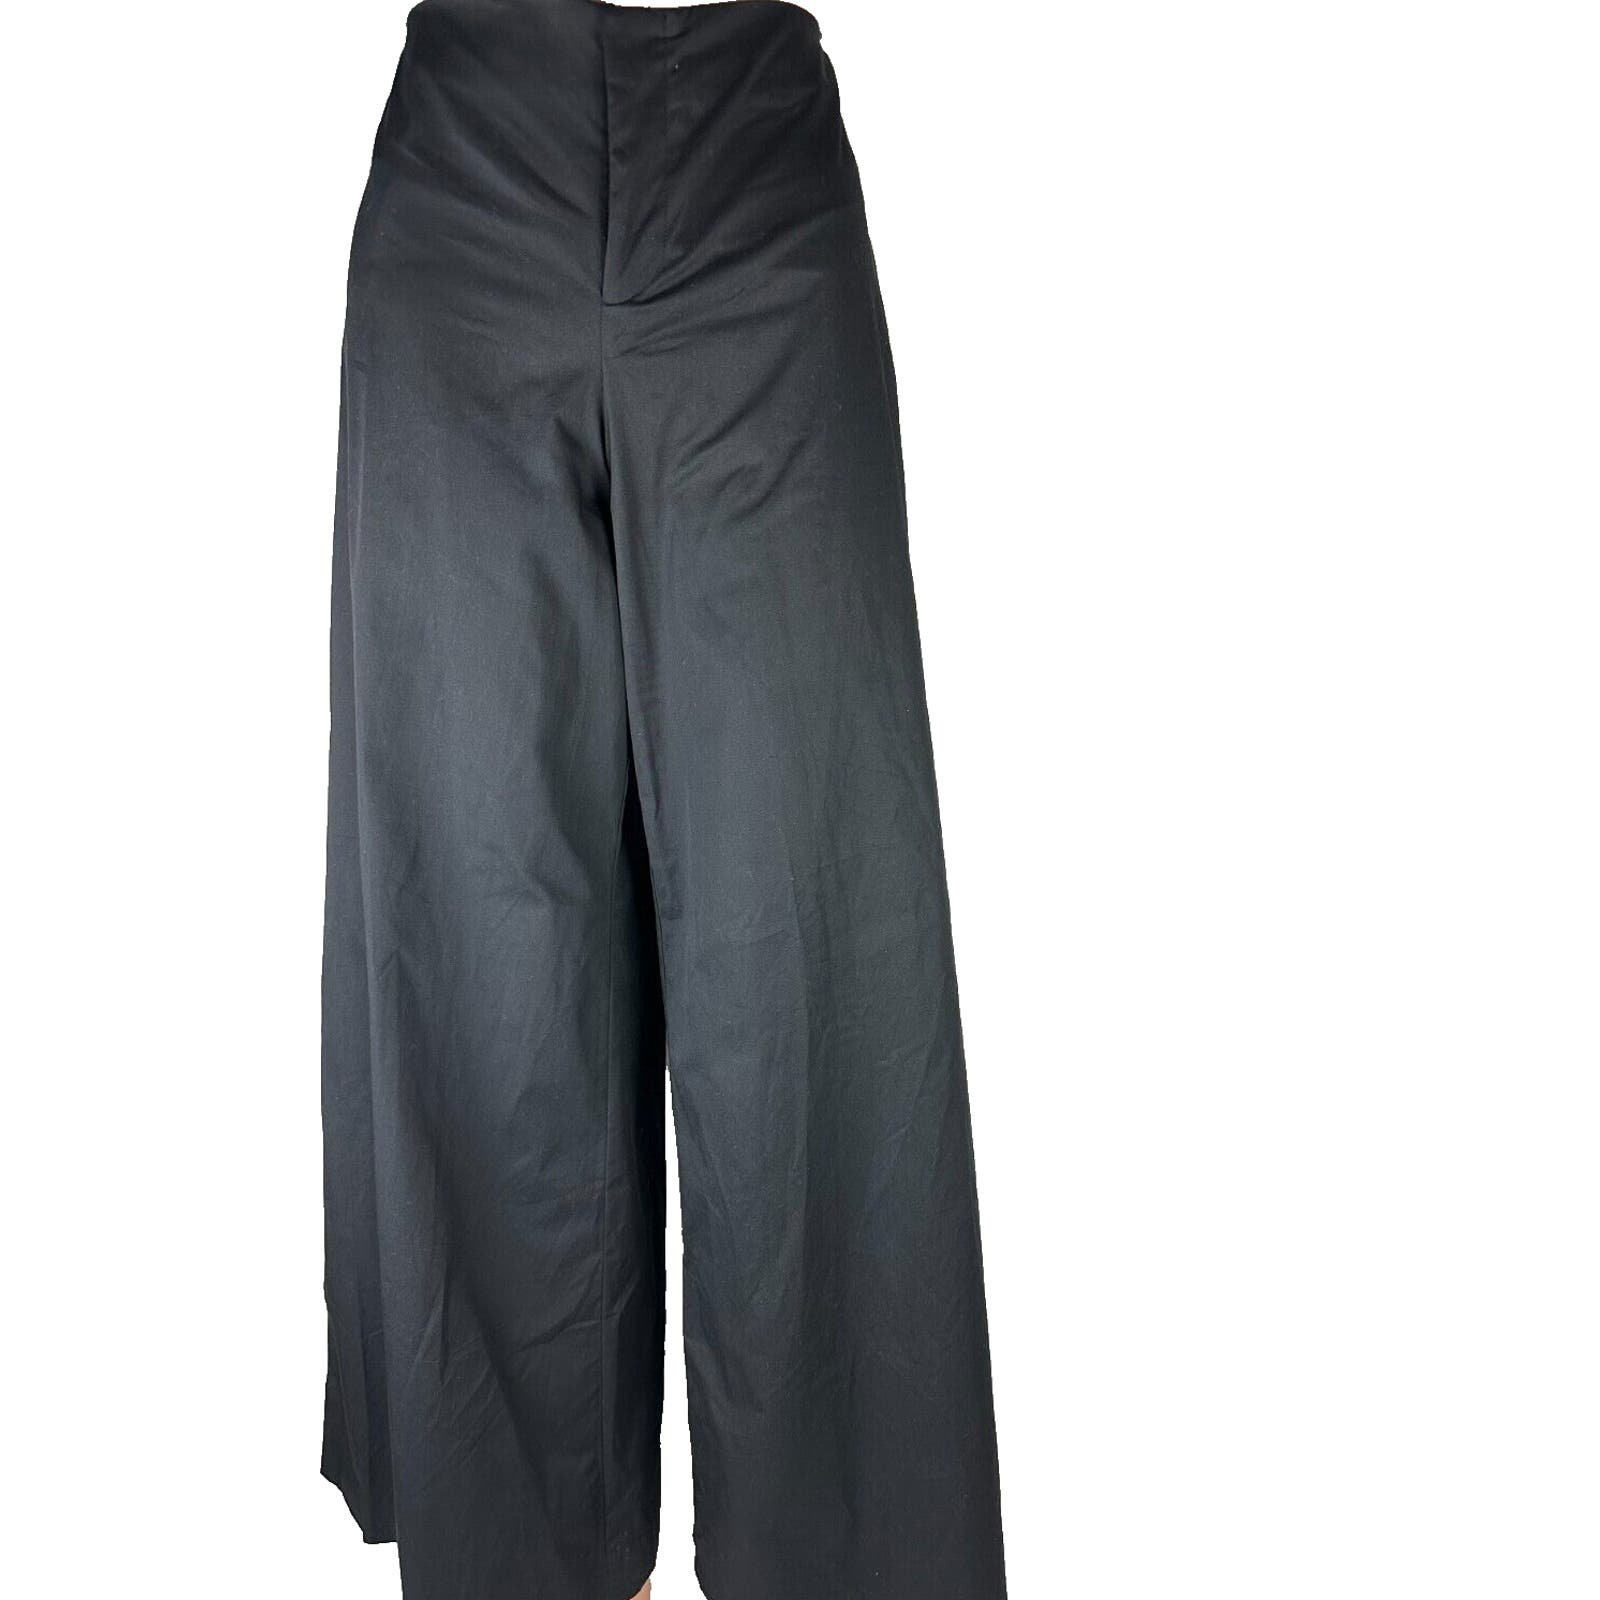 ZARA WIDE LEG FLOWING PALAZZO PANTS HIGH-WAIST BLACK SMALL New With Tags QYHoXY1I0